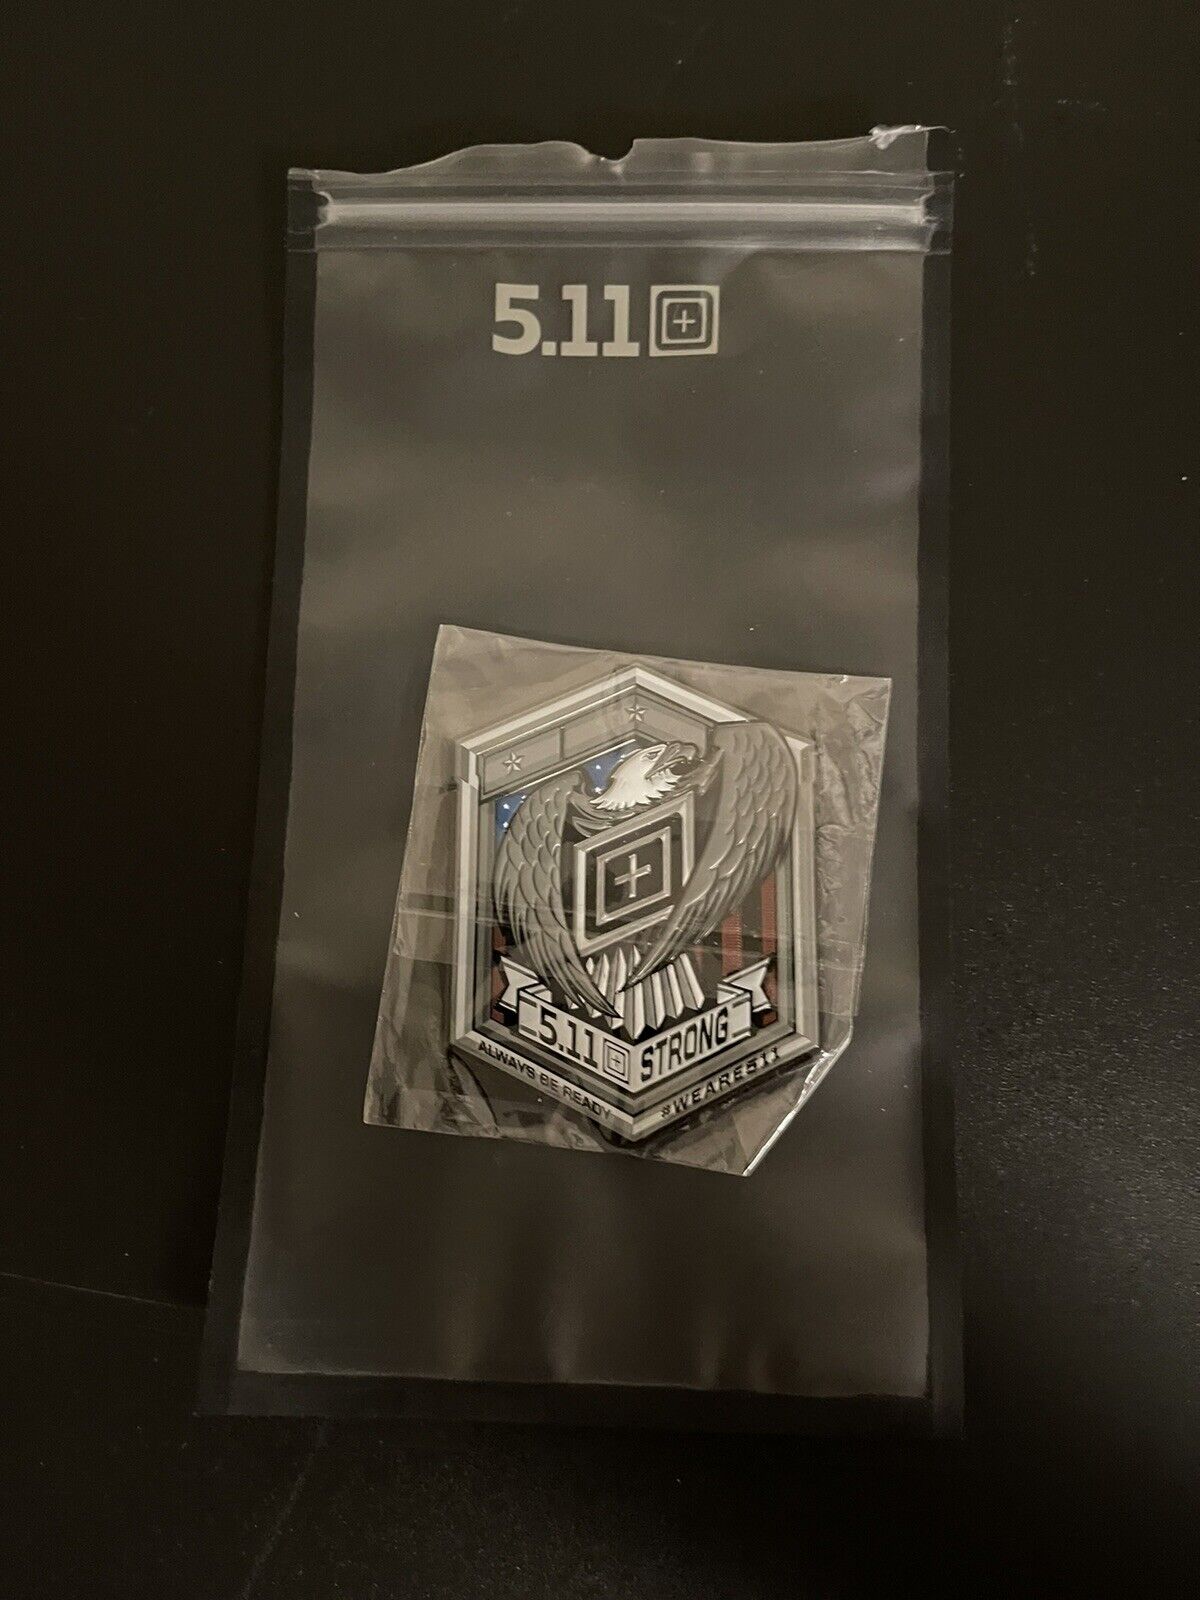 5.11 tactical patch